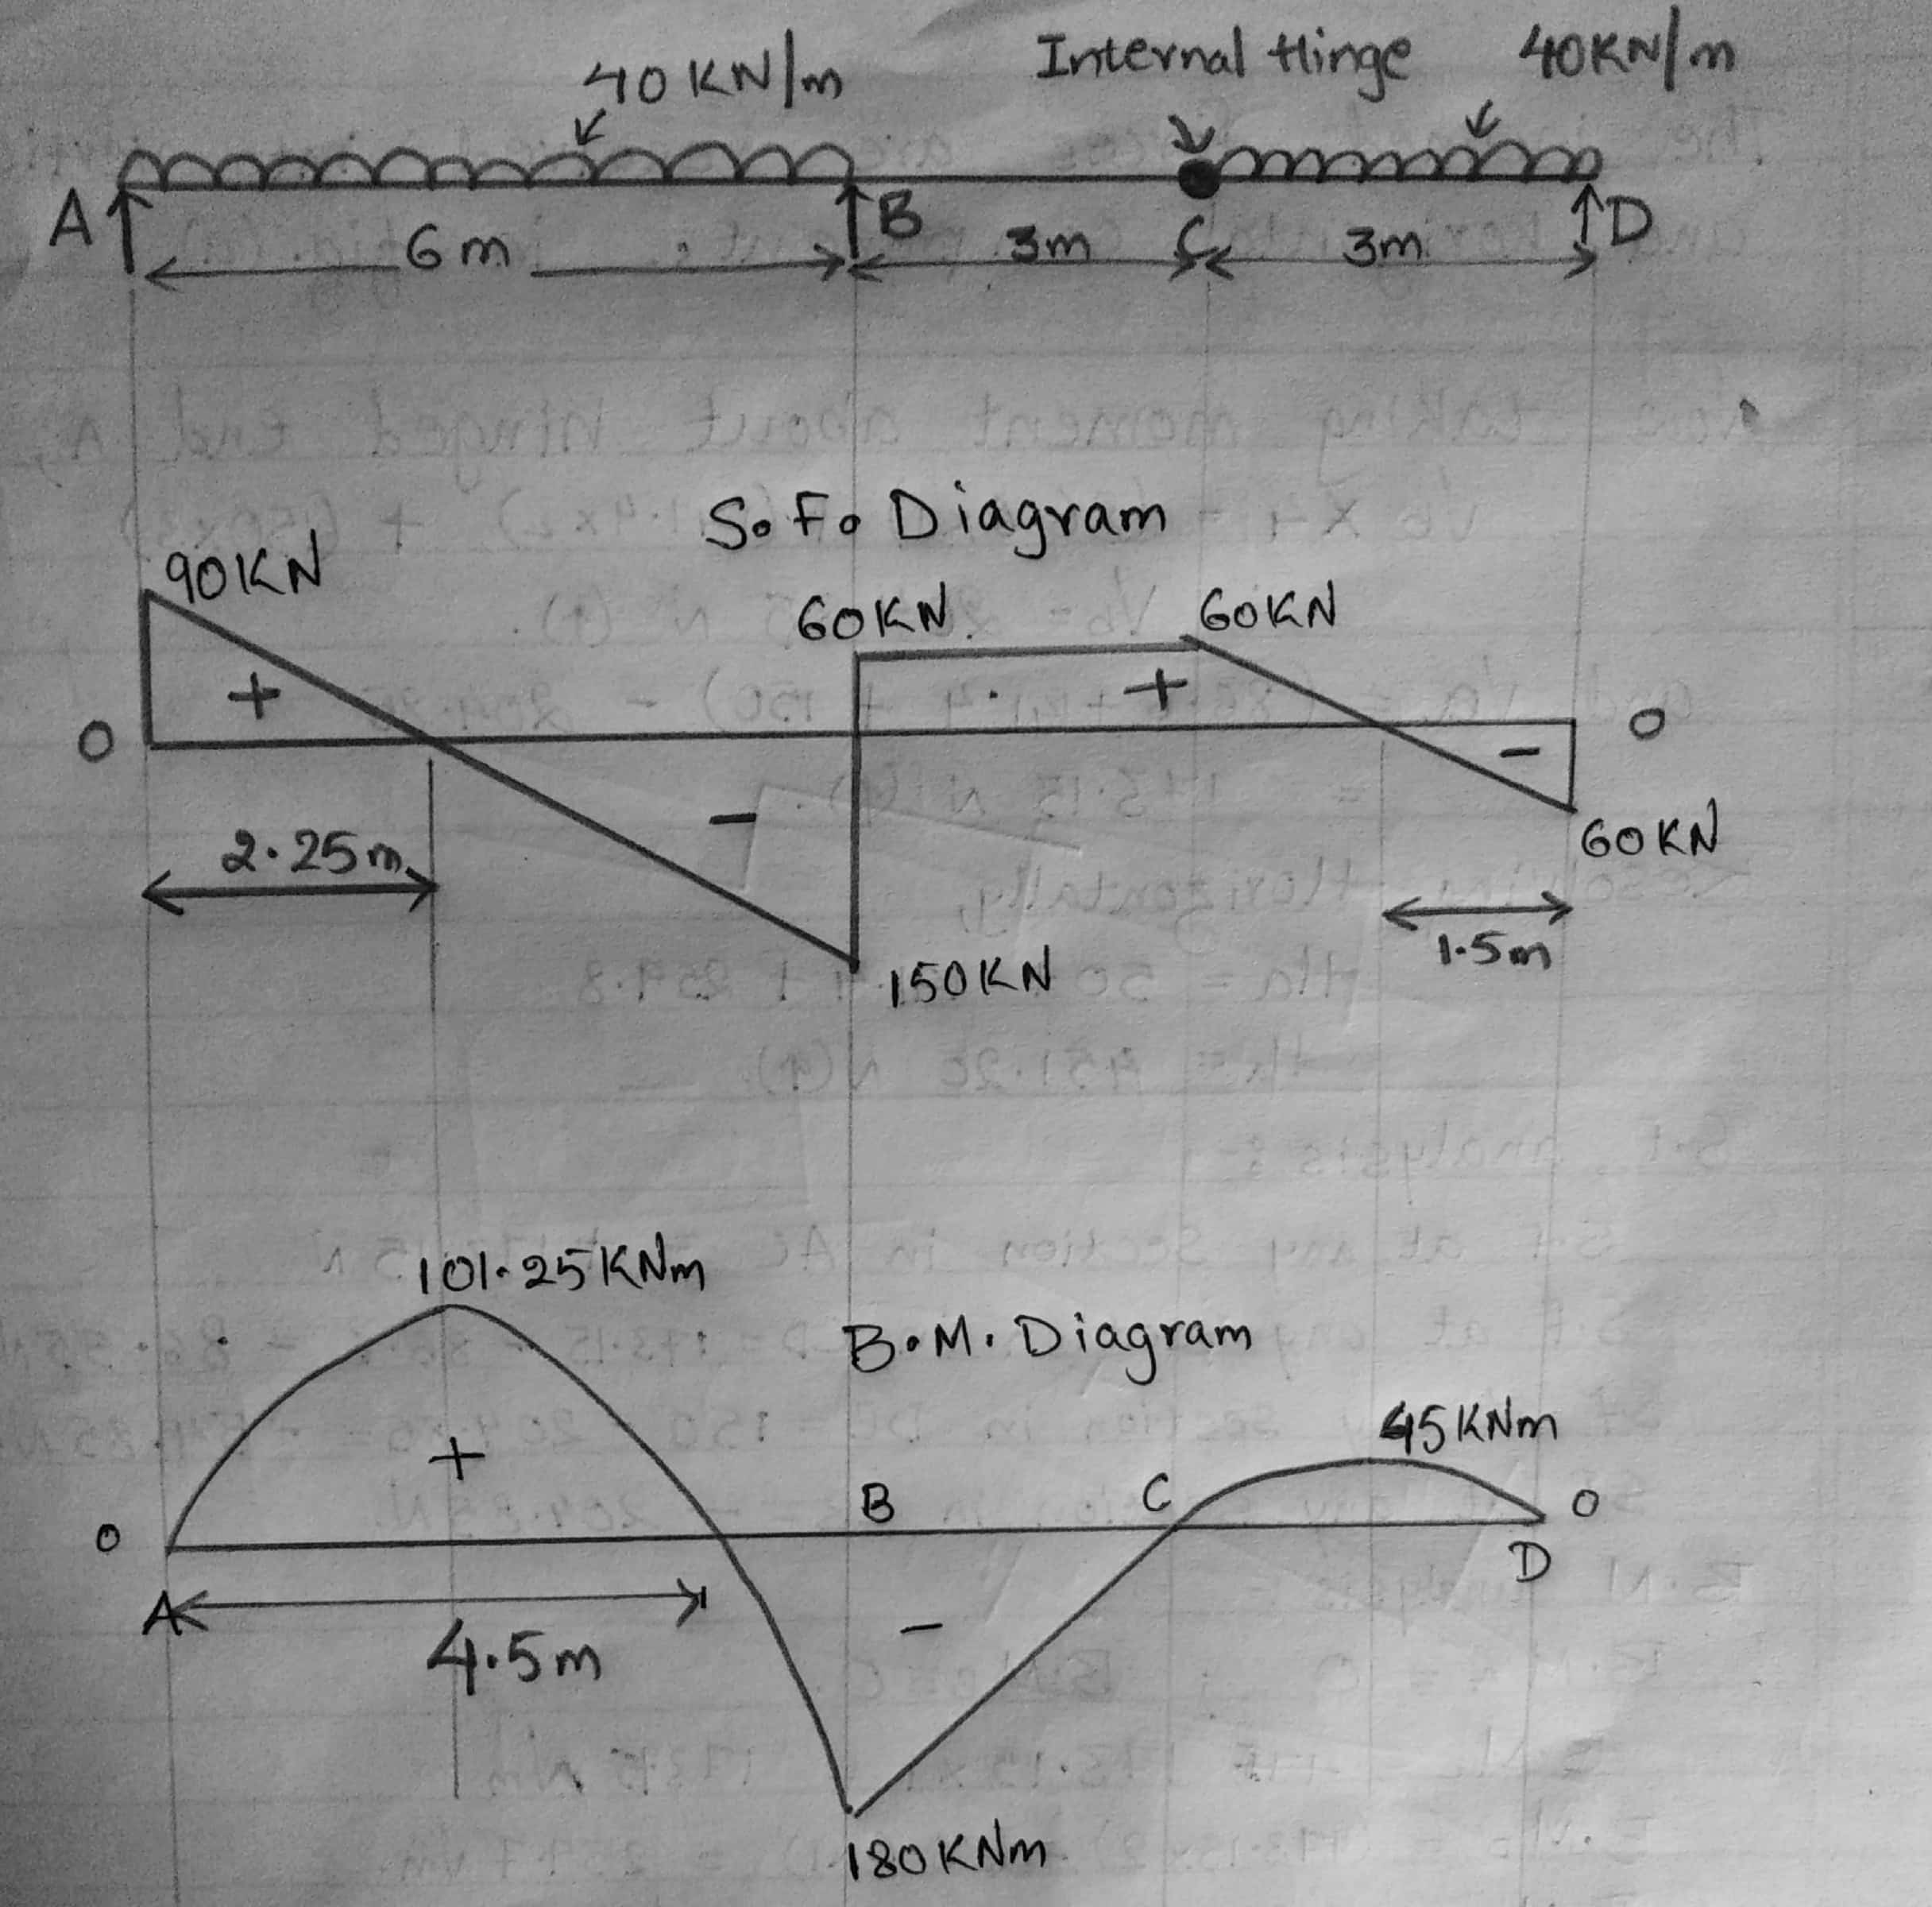 Bending Moment Diagram Draw The Shear Force Diagram And Bending Moment Diagram For The Beam